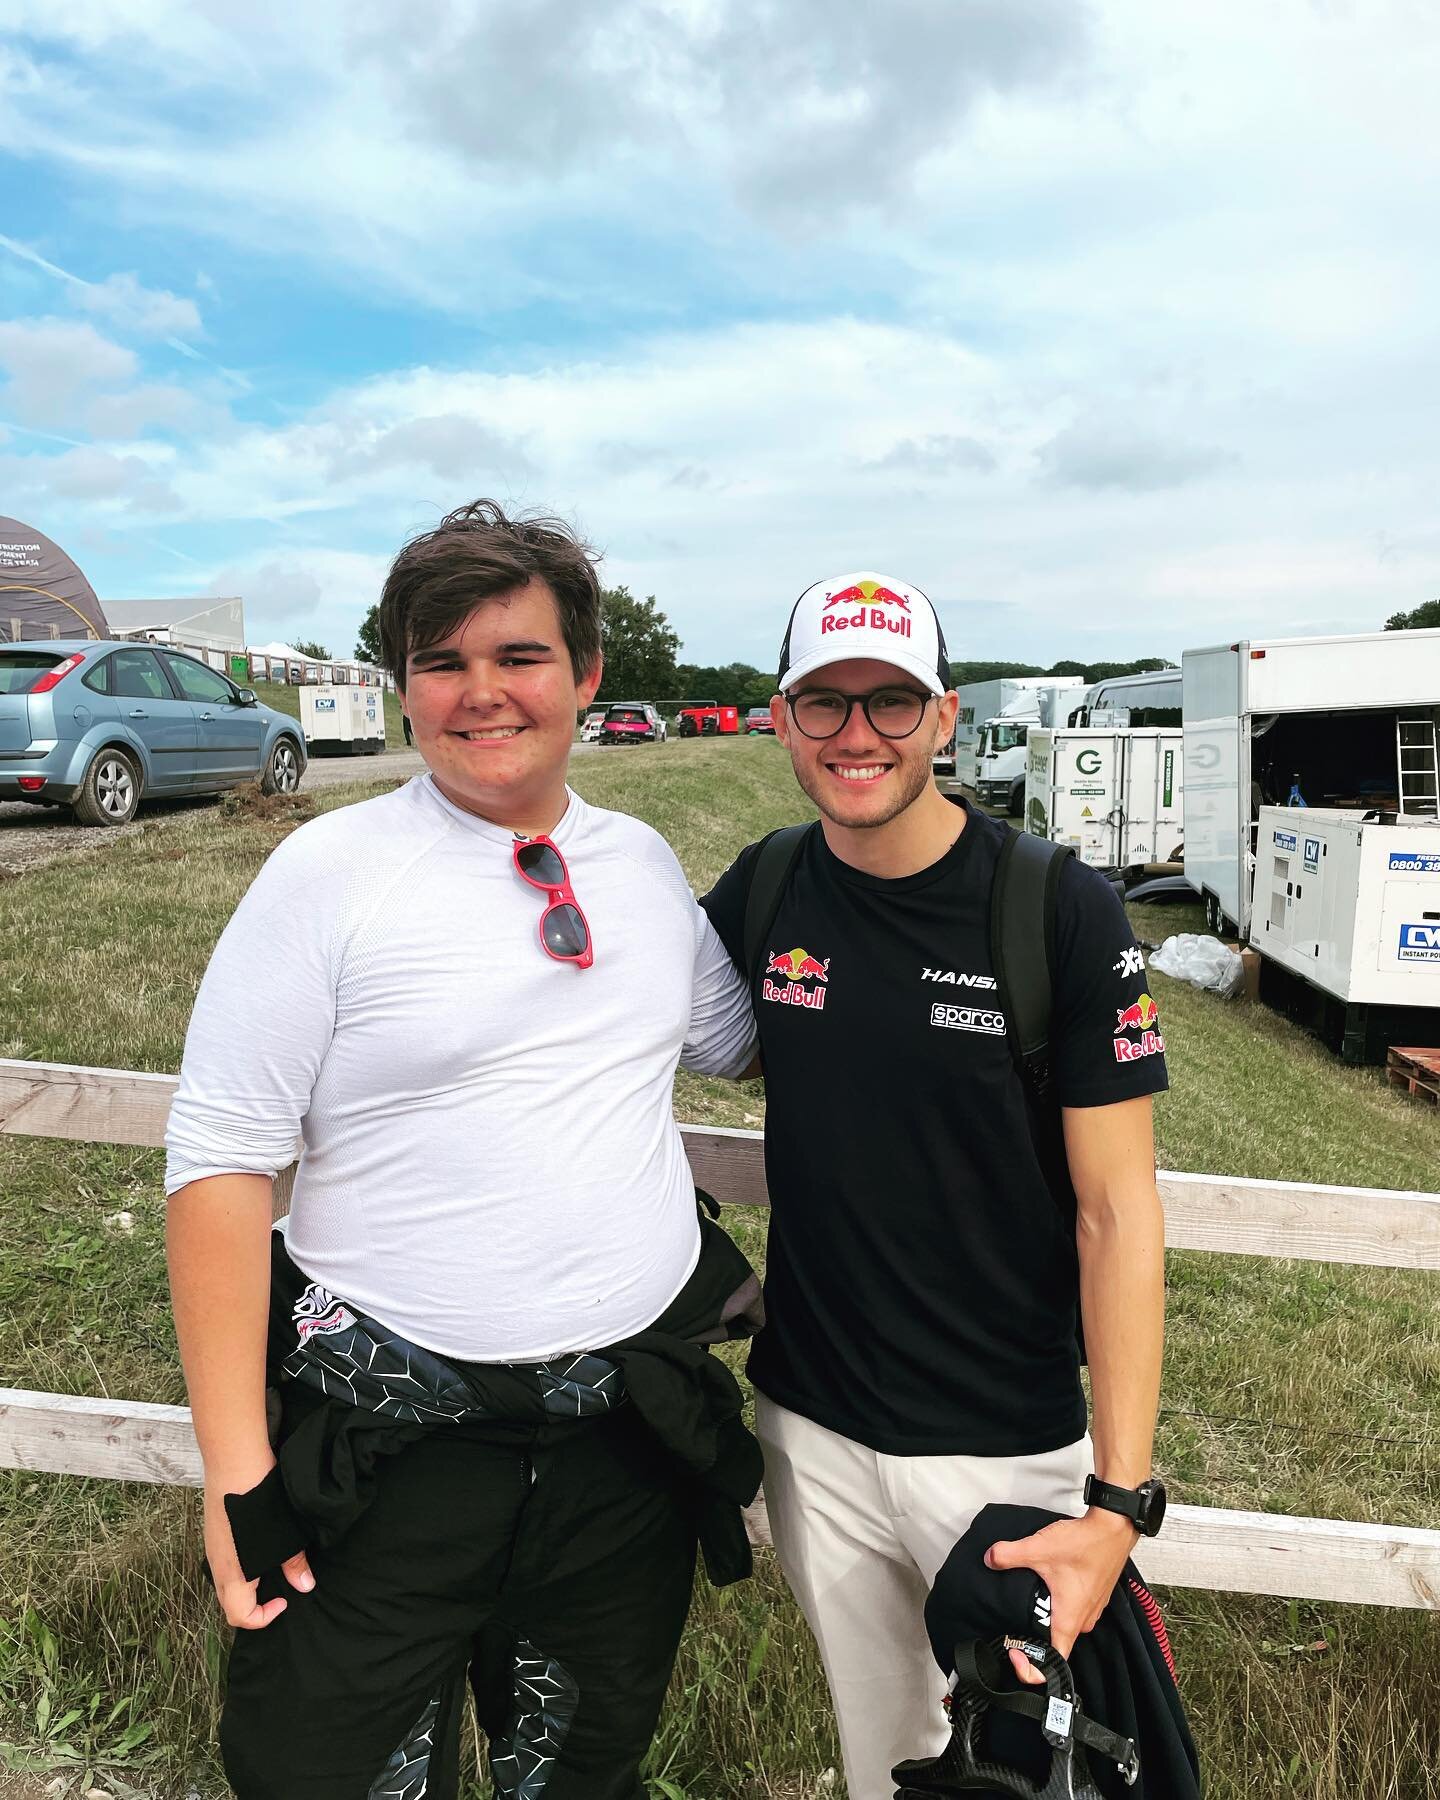 It was really nice to meet kevin Hansen on Sunday after the world rx he was really nice and said he loved driving the junior swifts